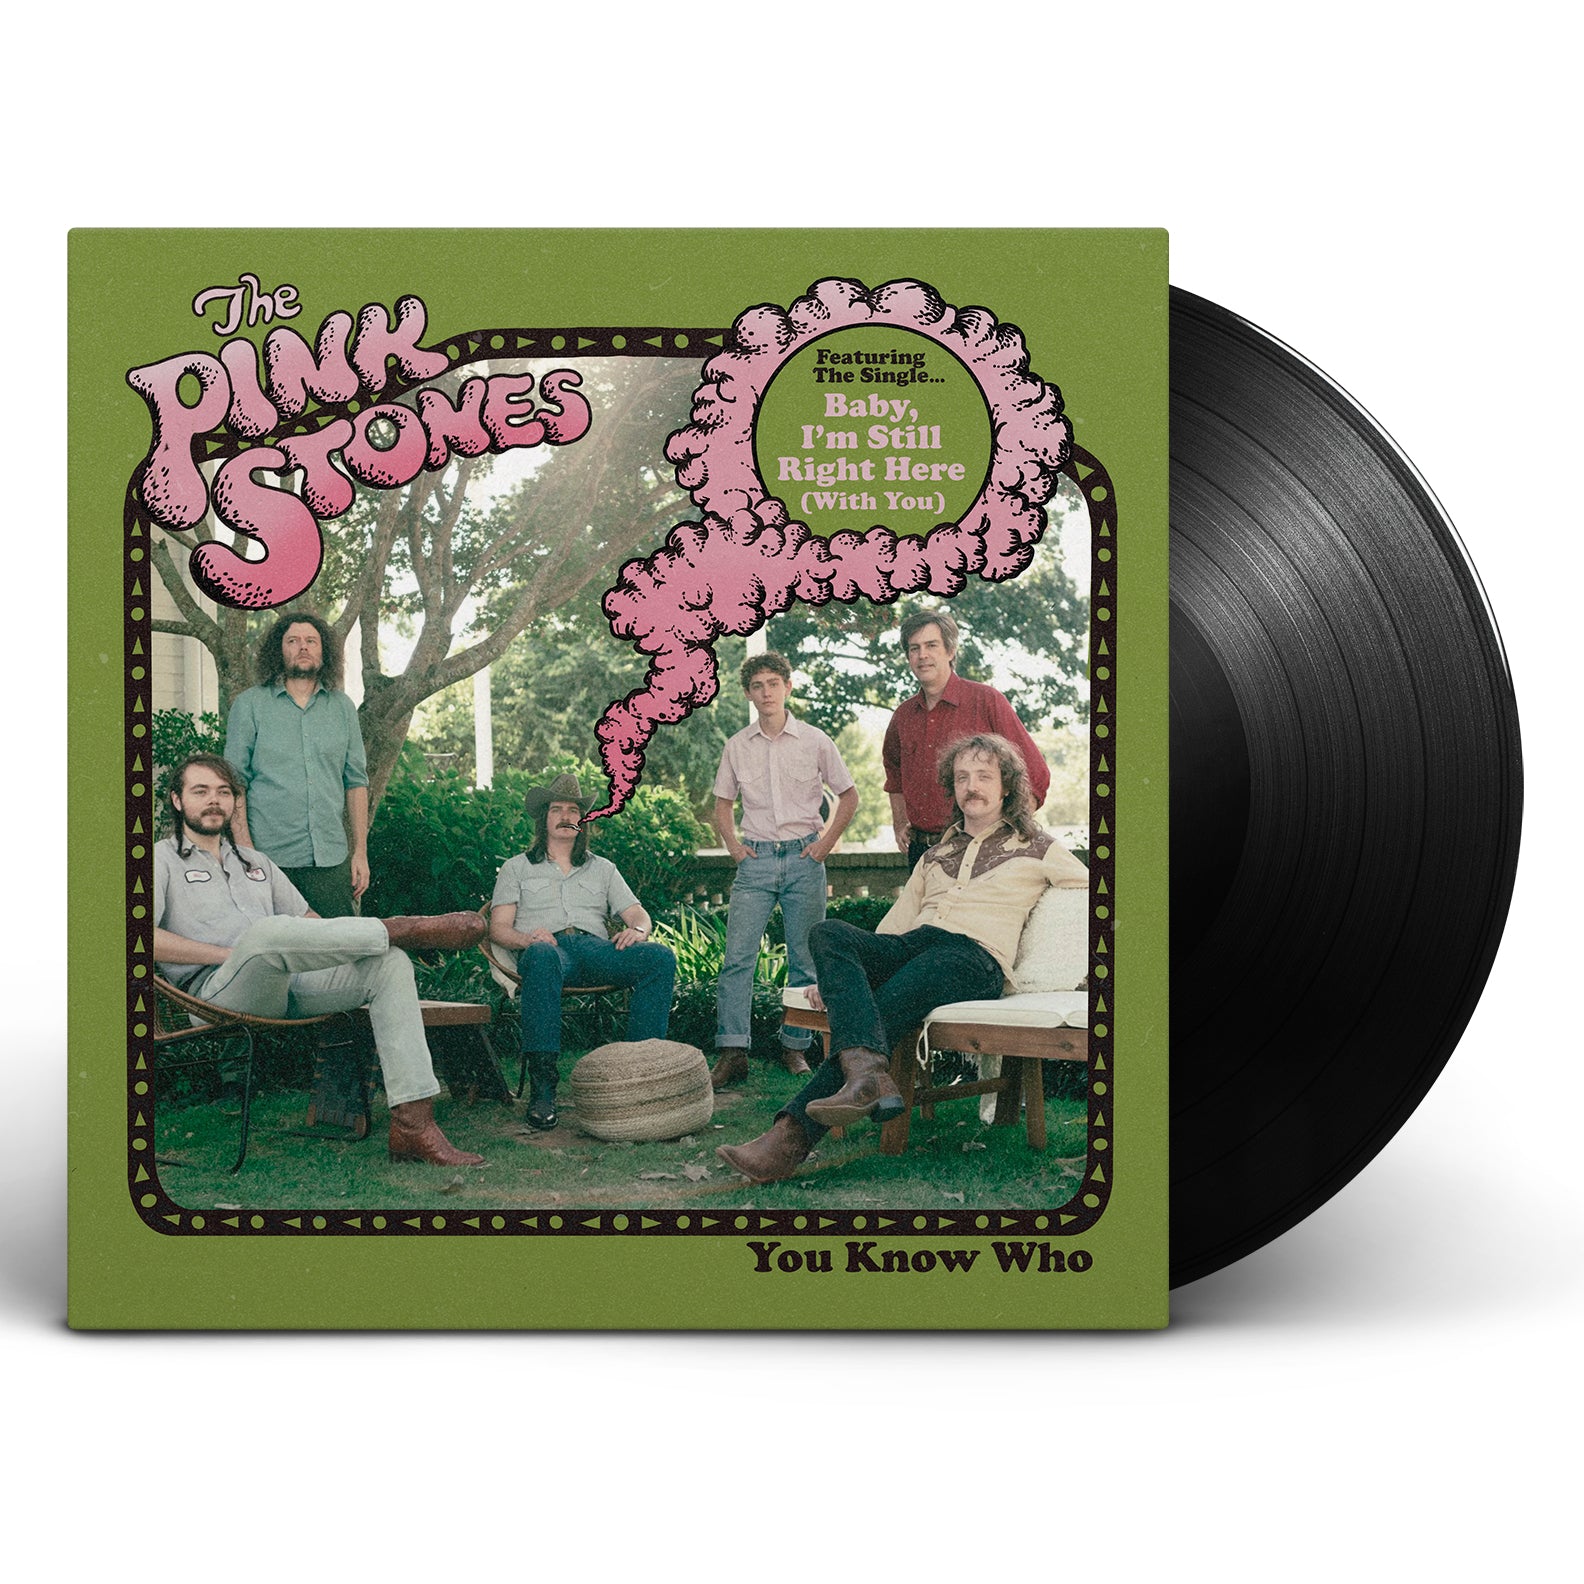 The Pink Stones - You Know Who [Vinyl]